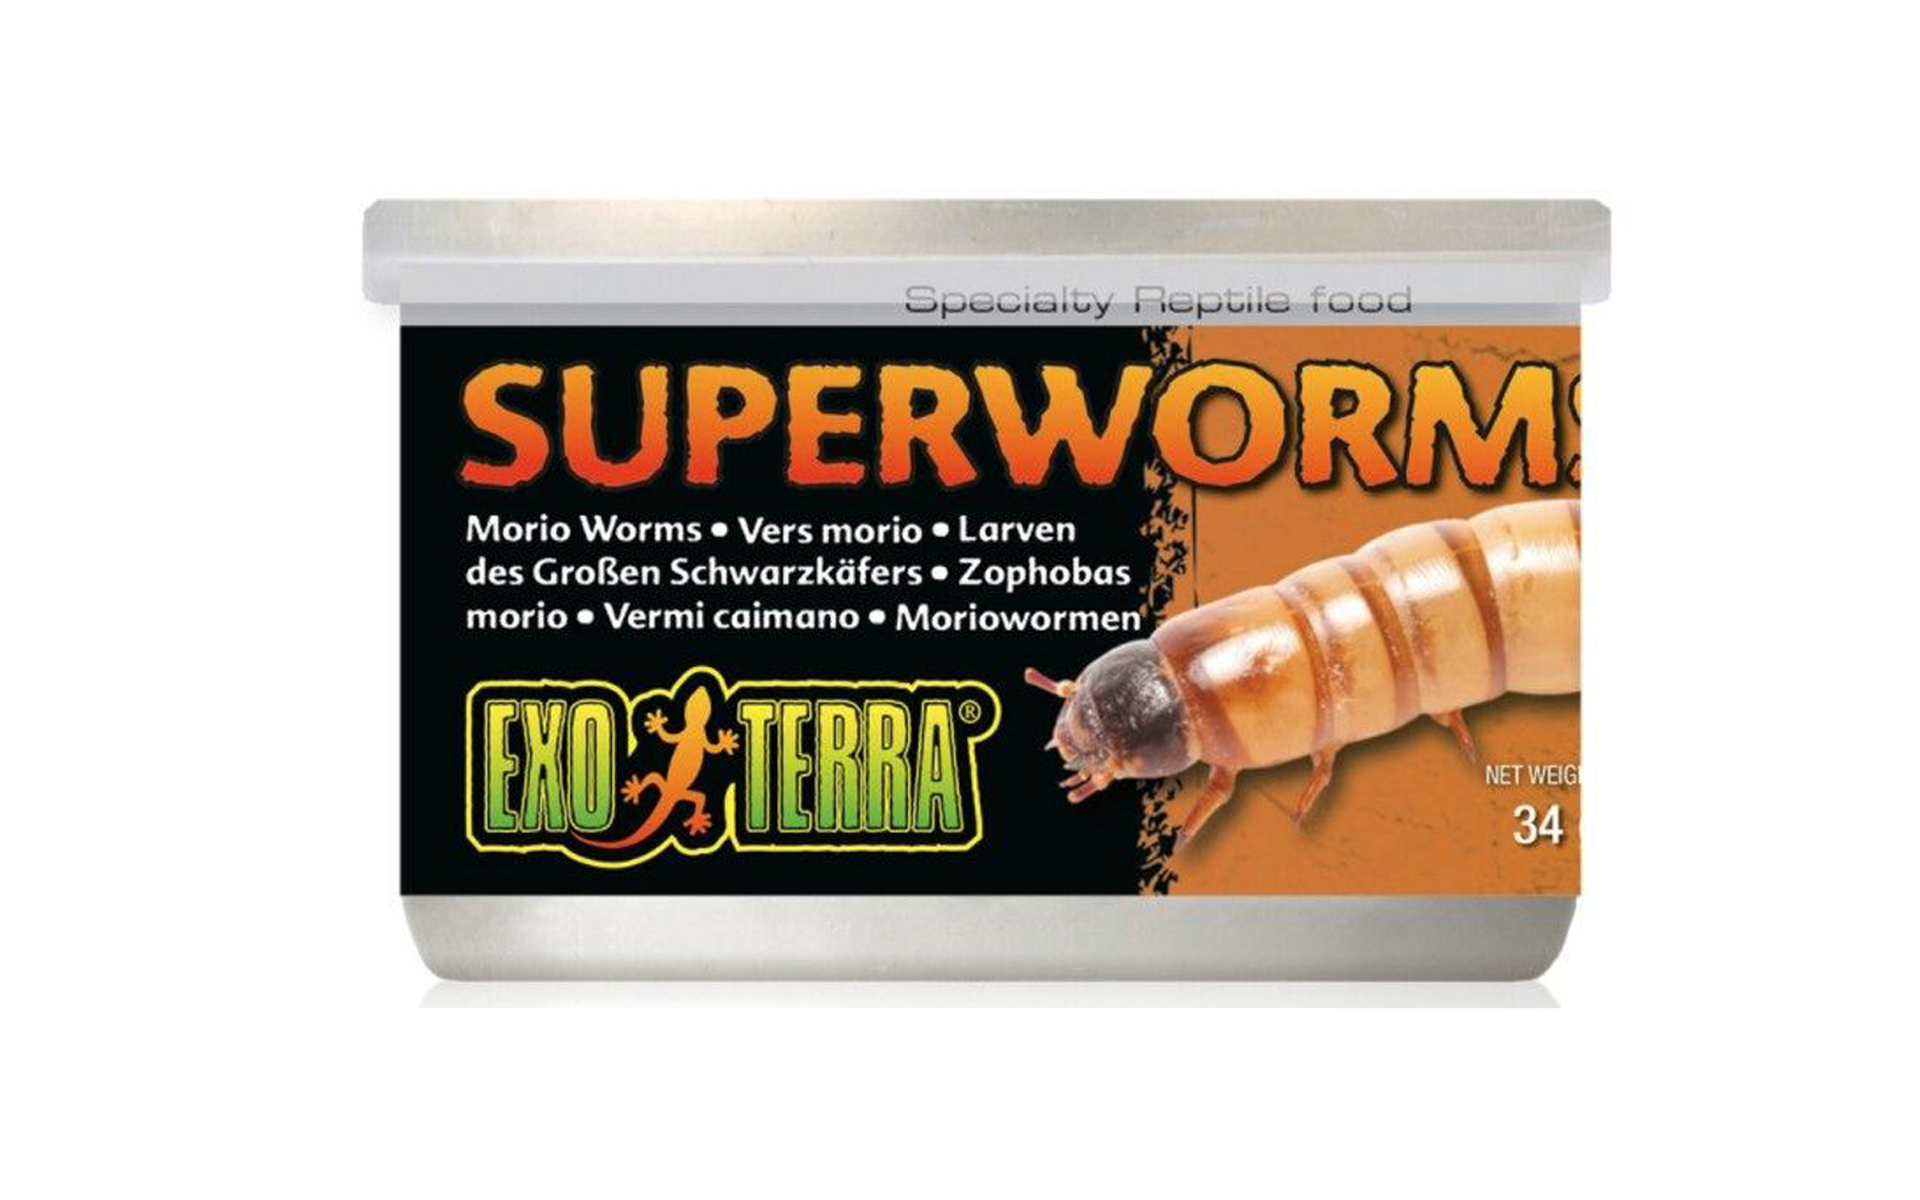 Canned Superworms Specialty Reptile Food, 1.2 oz